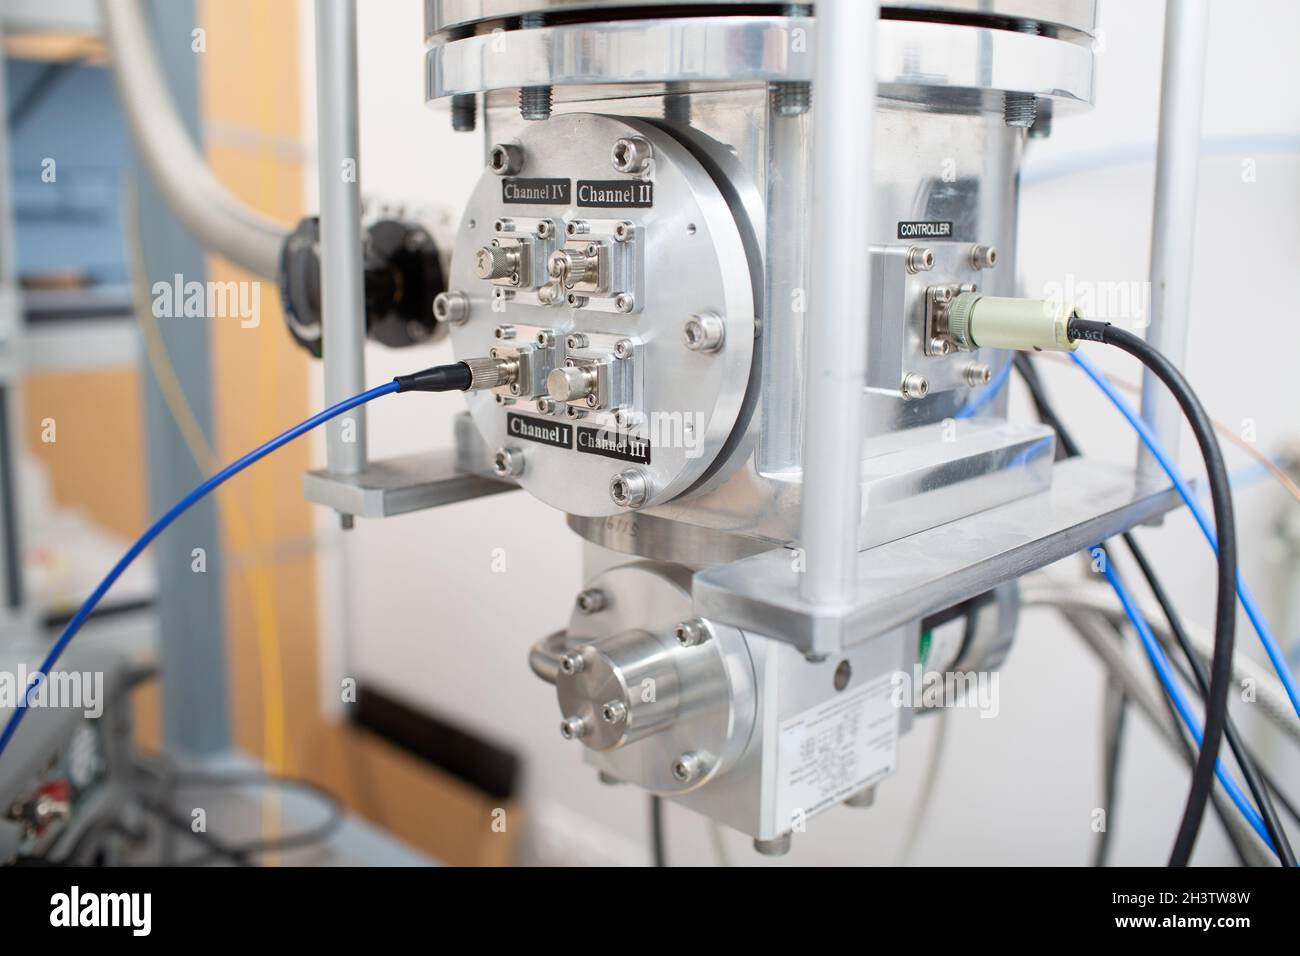 Single photon detector at scientific laboratory without people Stock Photo